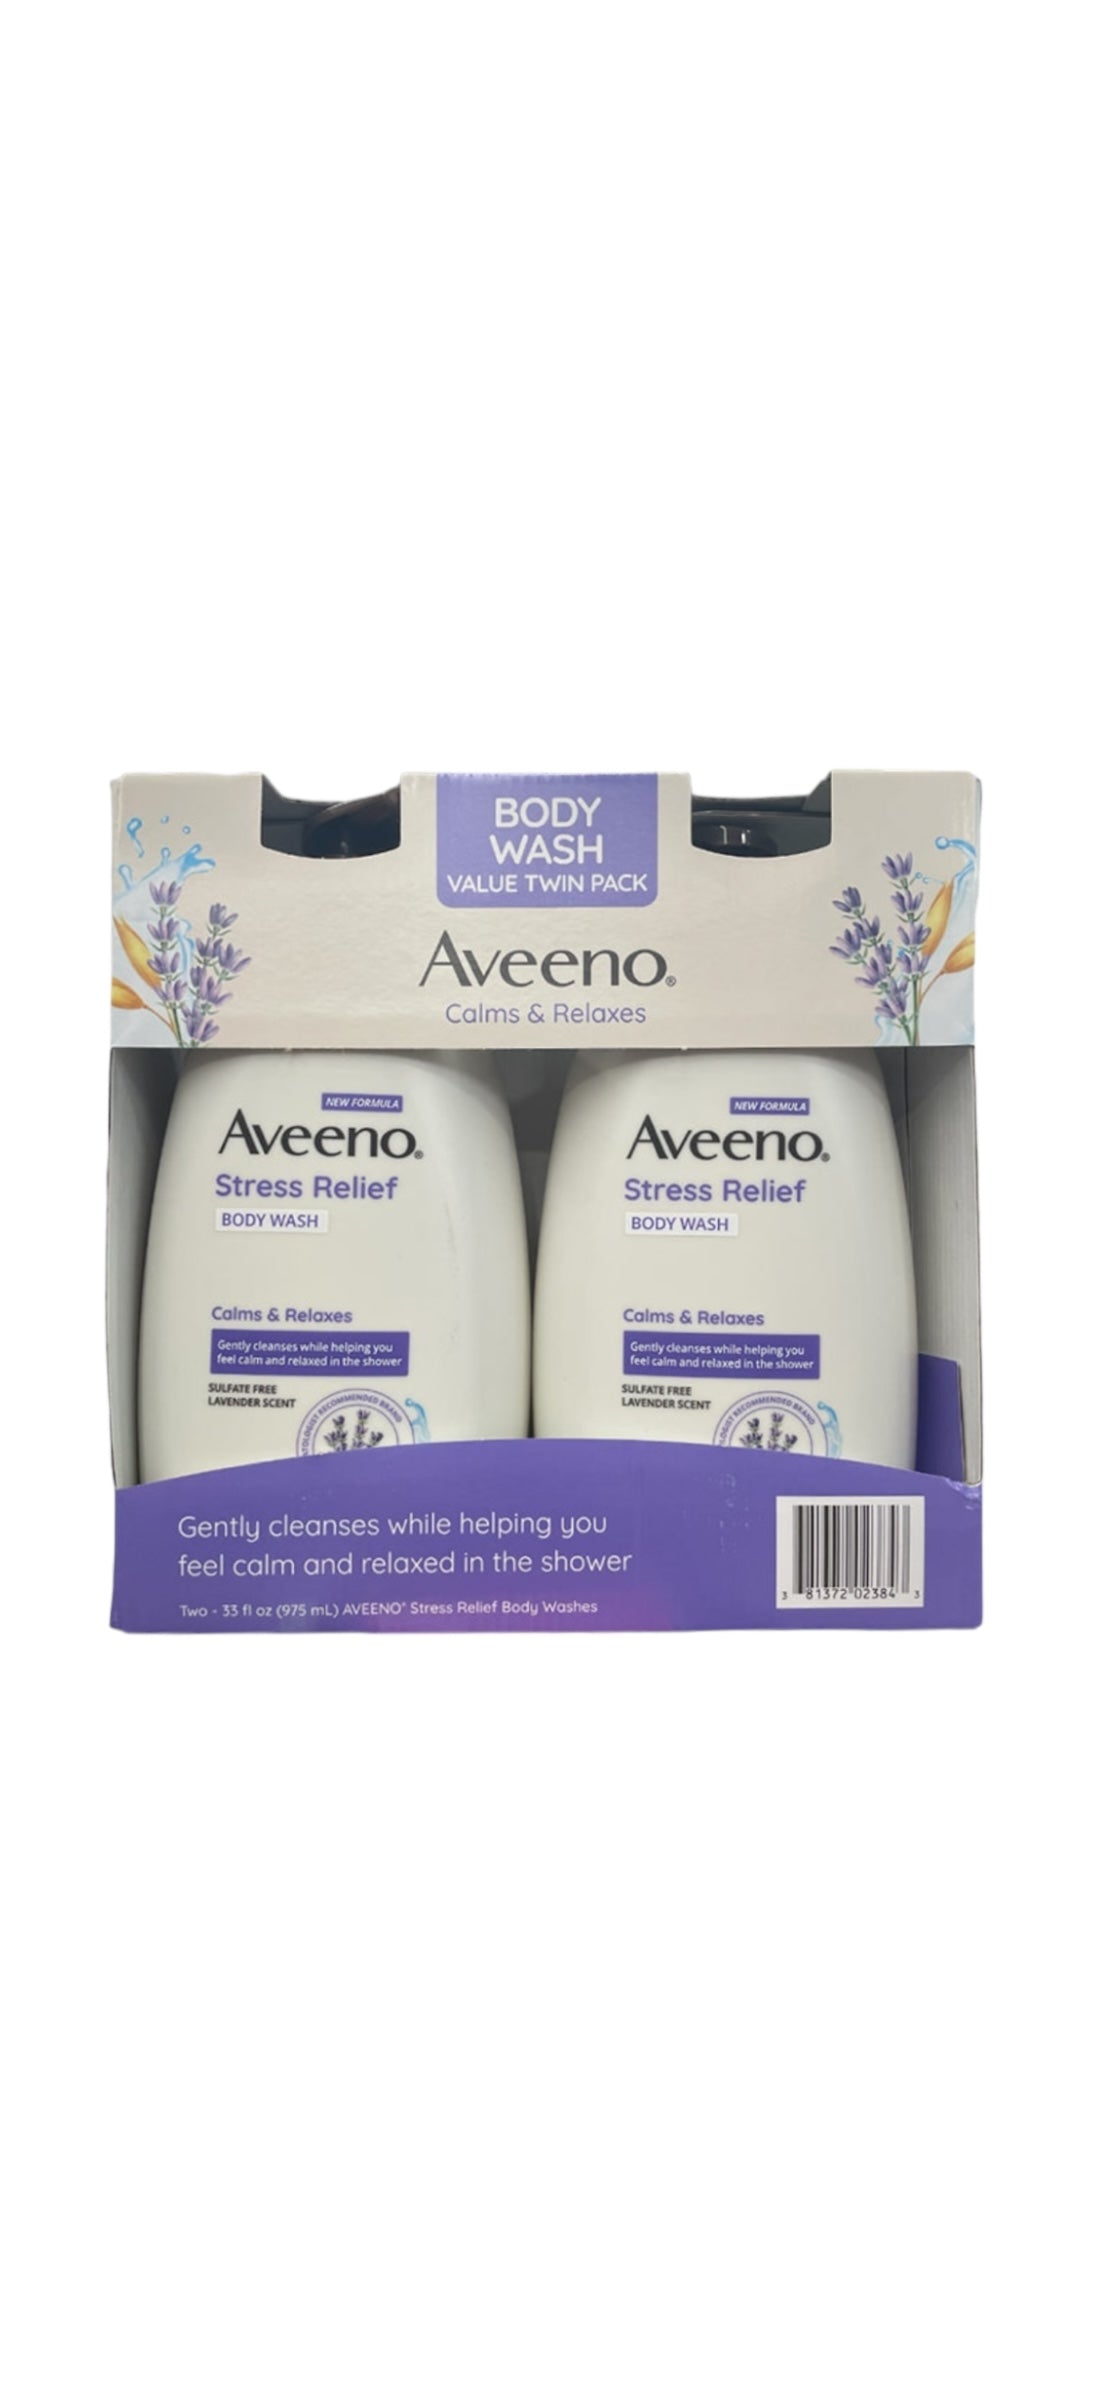 Aveeno Stress Relief Body Wash Calms & Relaxes, 33 oz (2 Pack)